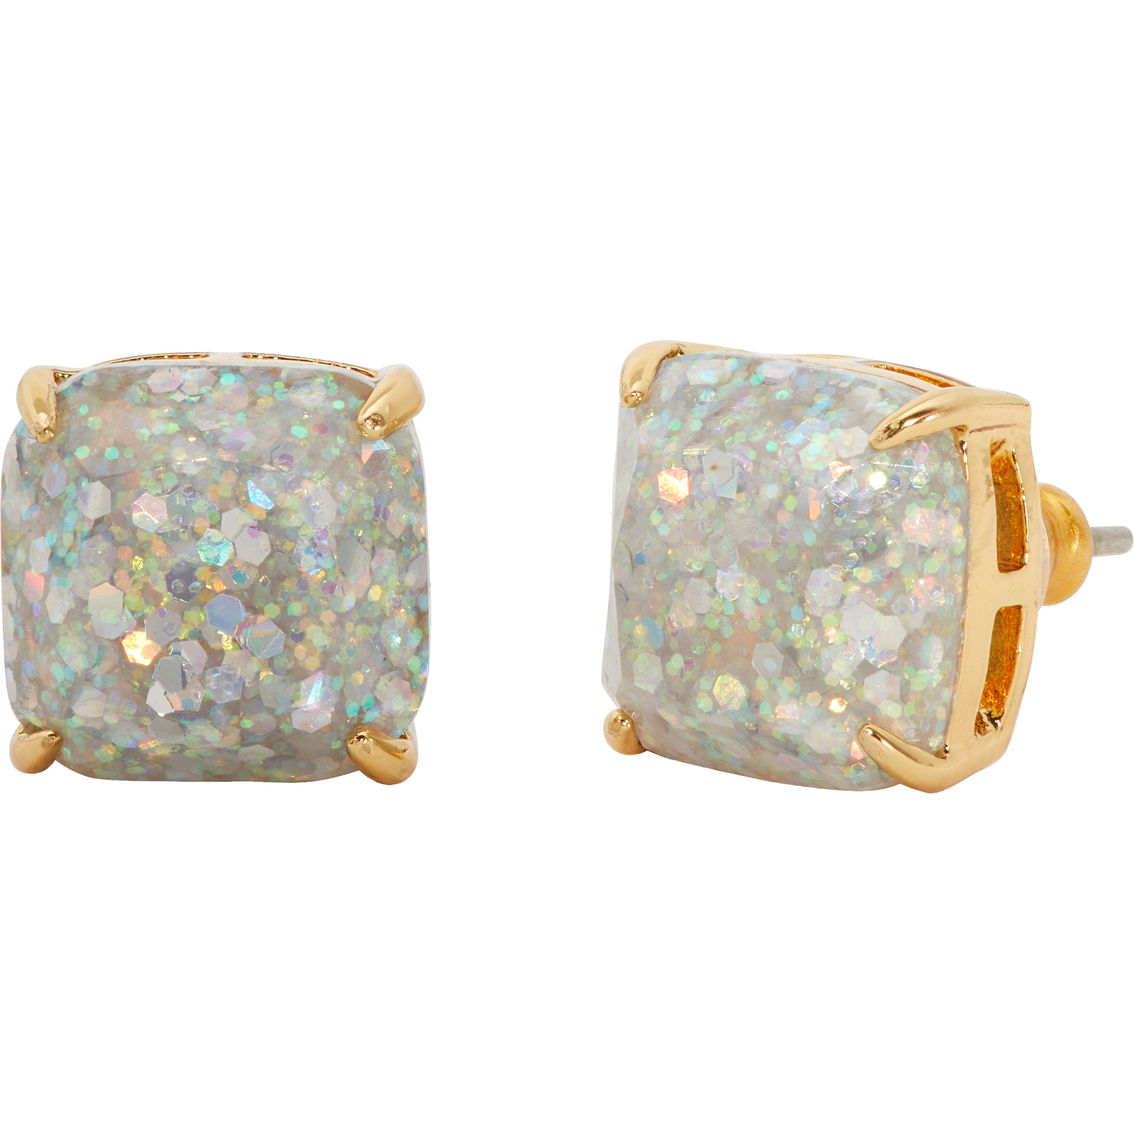 Kate Spade New York Small Square Stud Earrings - Image 1 of 2